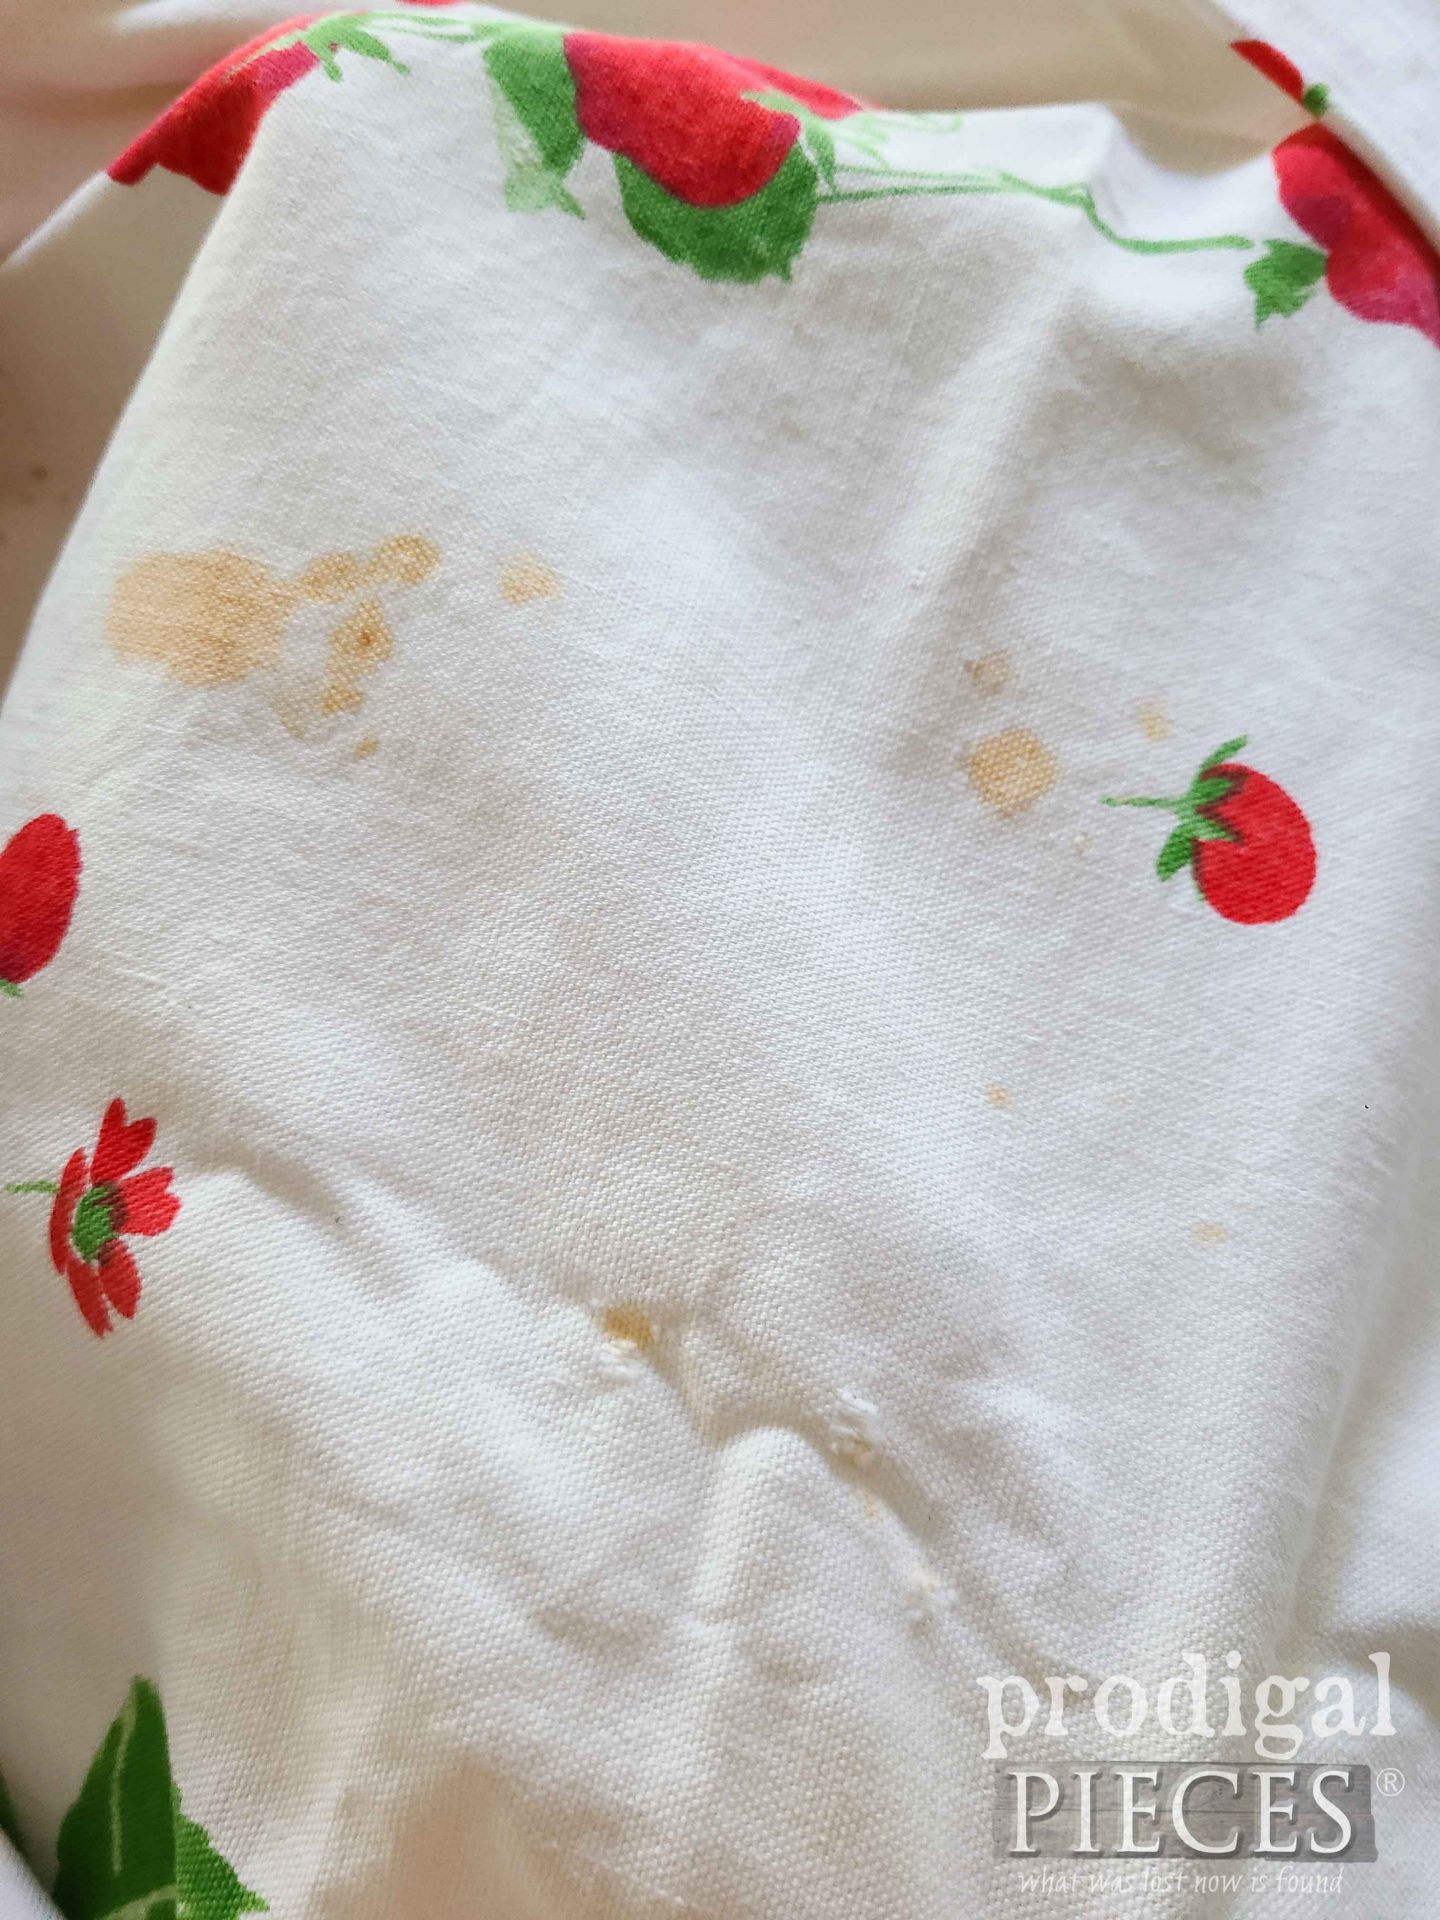 Damaged Vintage Tablecloth with Stains | prodigalpieces.com #prodigalpieces